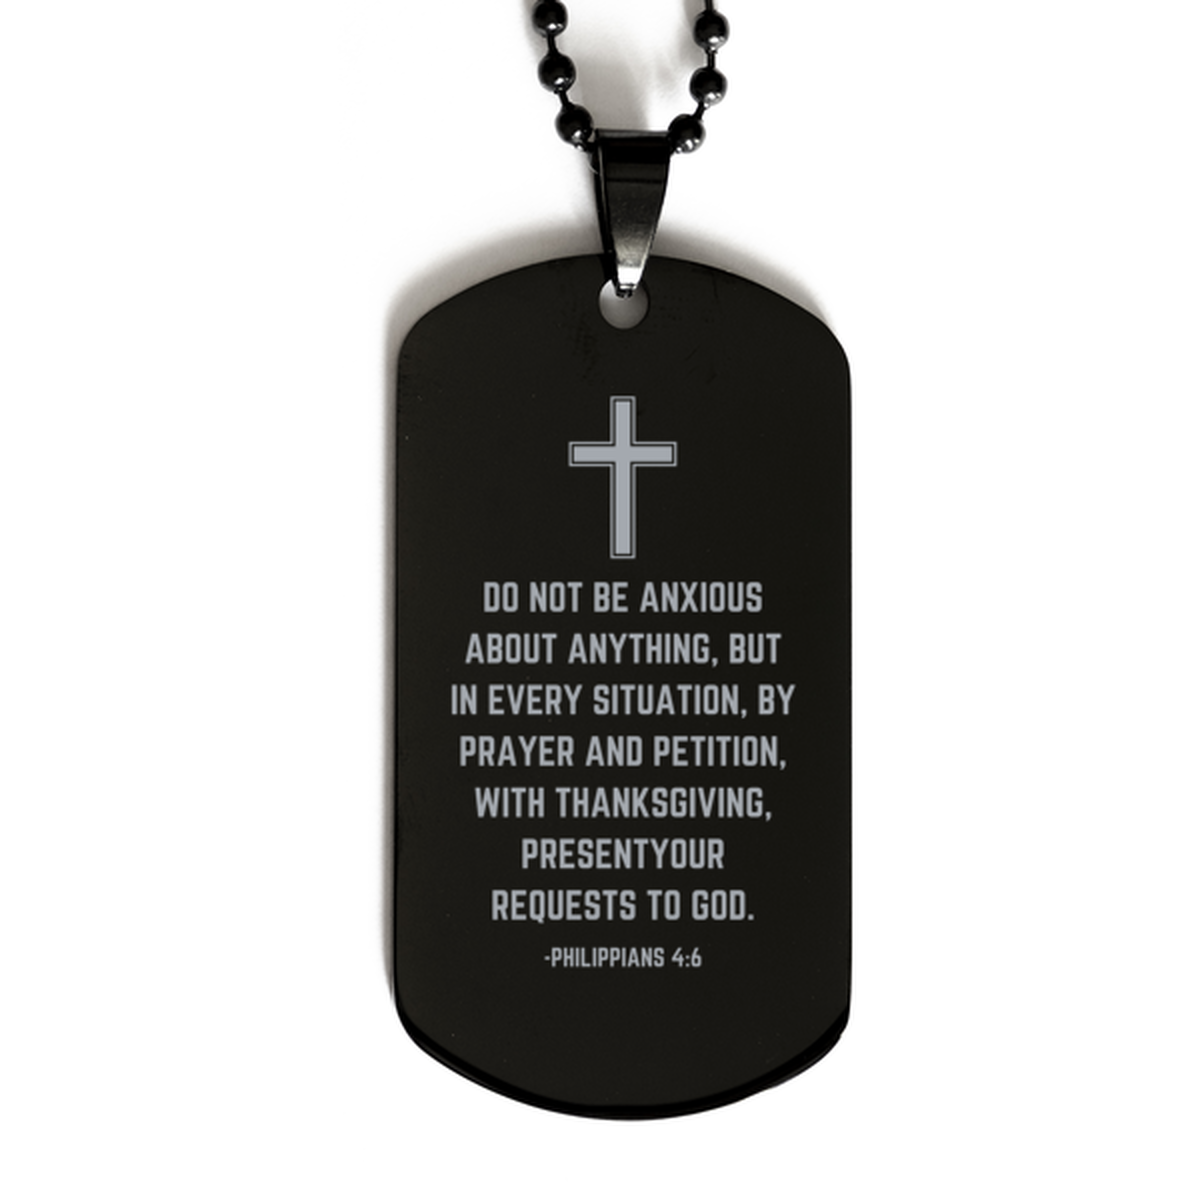 Baptism Gifts For Teenage Boys Girls, Christian Bible Verse Black Dog Tag, Do not be anxious about anything, Confirmation Gifts, Bible Verse Necklace for Son, Godson, Grandson, Nephew